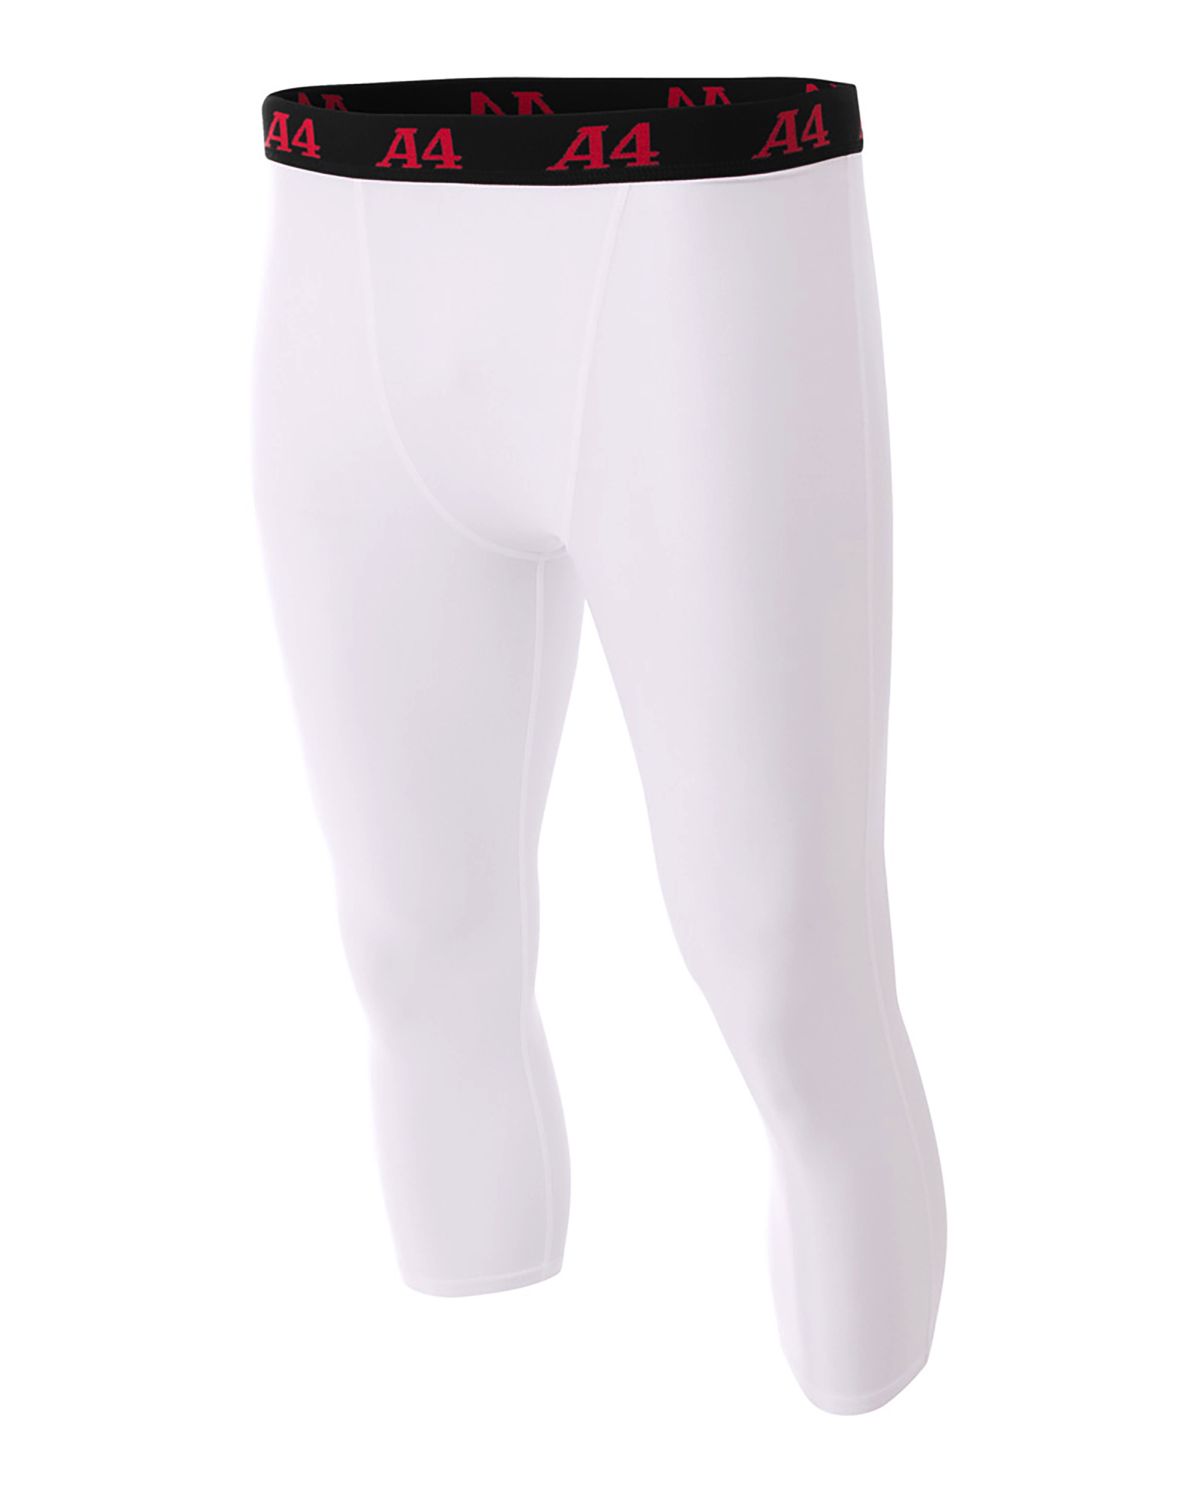 'A4 NB6202 Youth Polyester/Spandex Compression Tight'